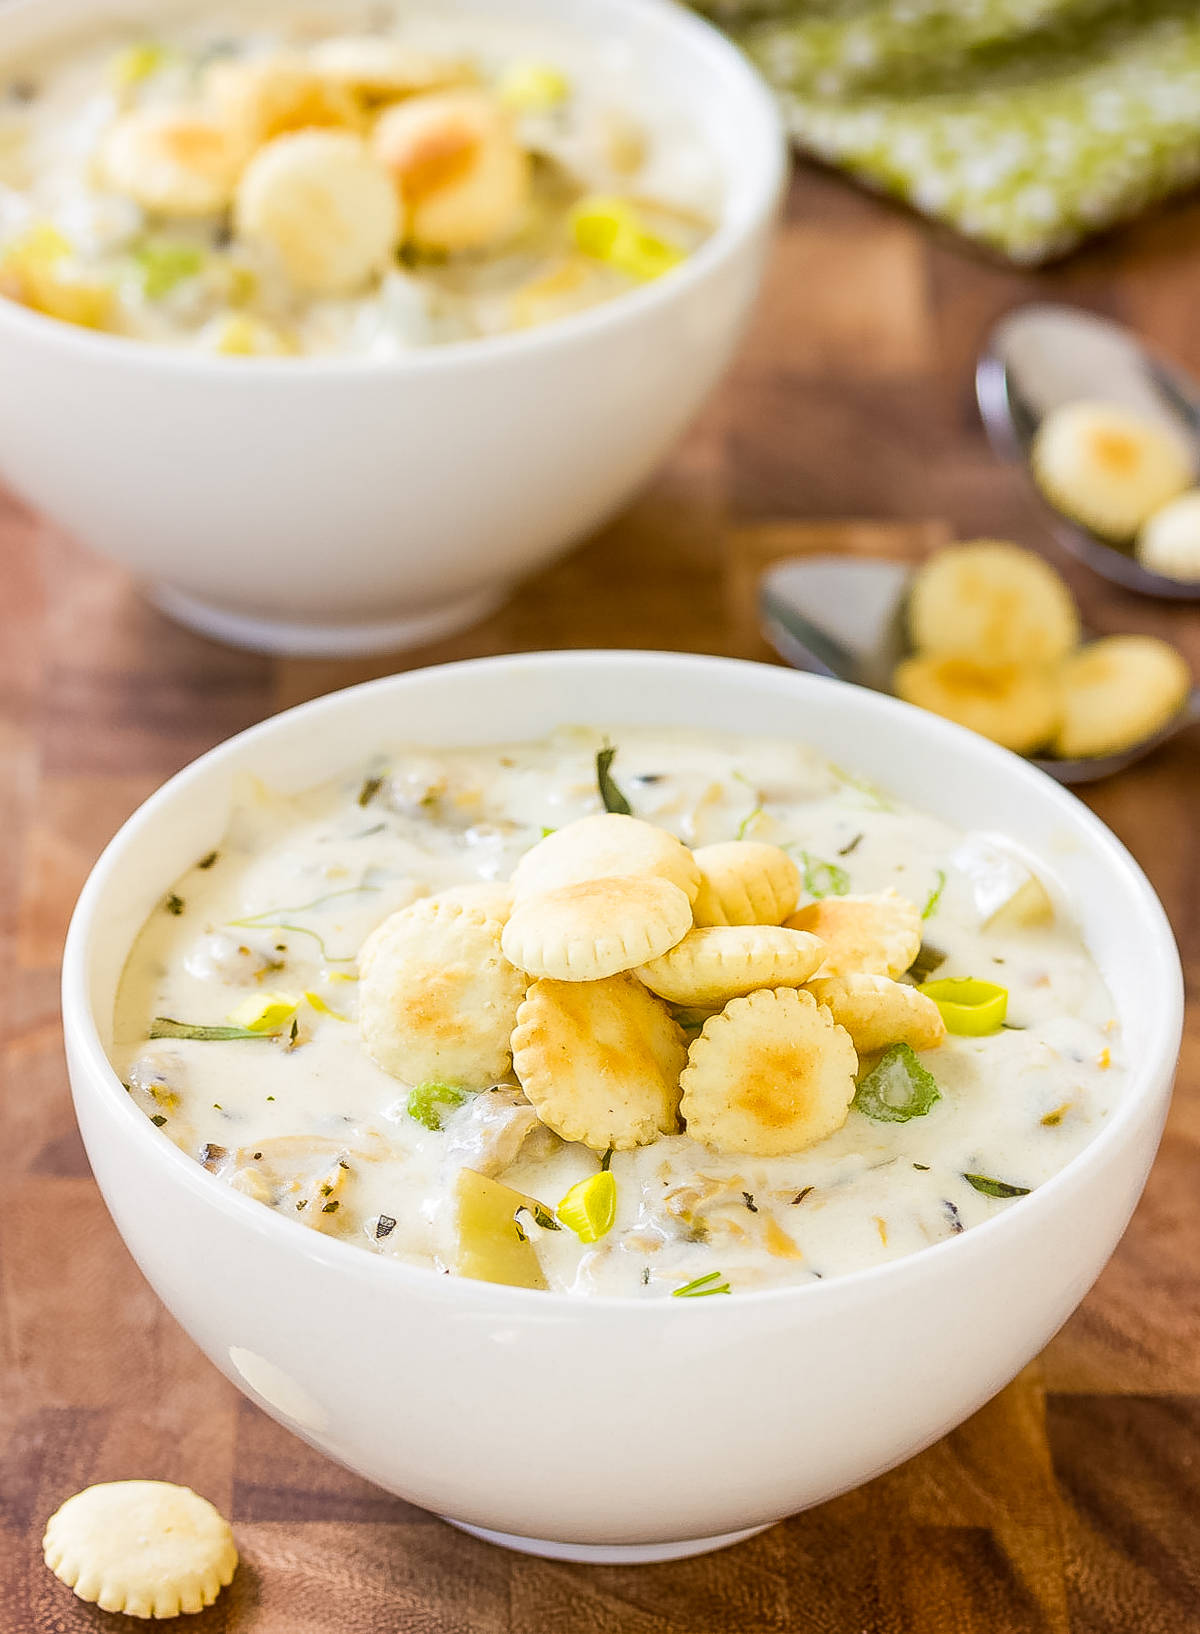 New England Clam Chowder Topped With Saltine Crackers Wallpaper